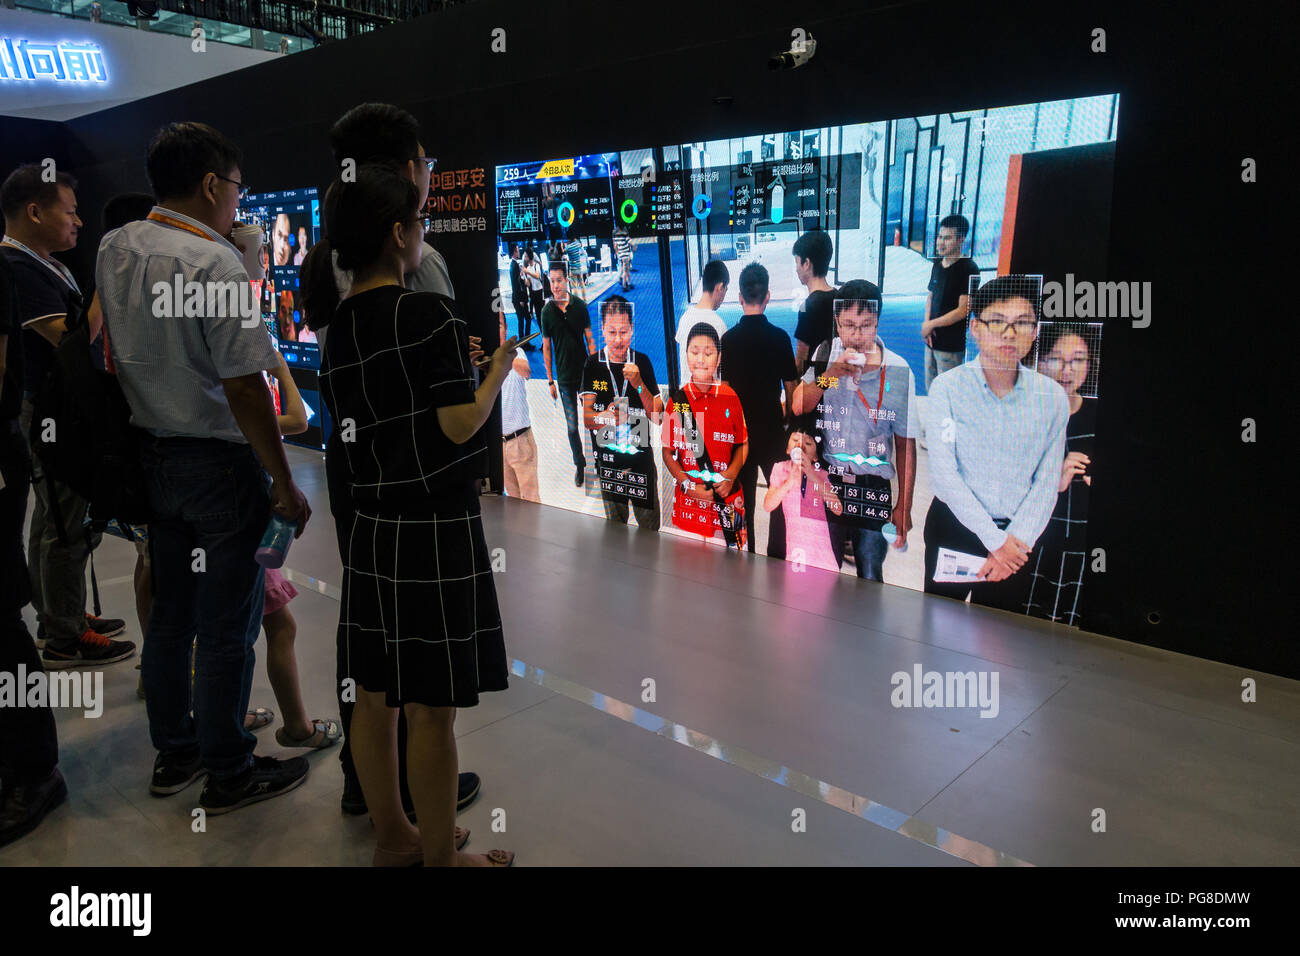 Face monitoring and surveillance technology exhibit at China Smart City International Expo 2018 in Shenzhen, China. Stock Photo